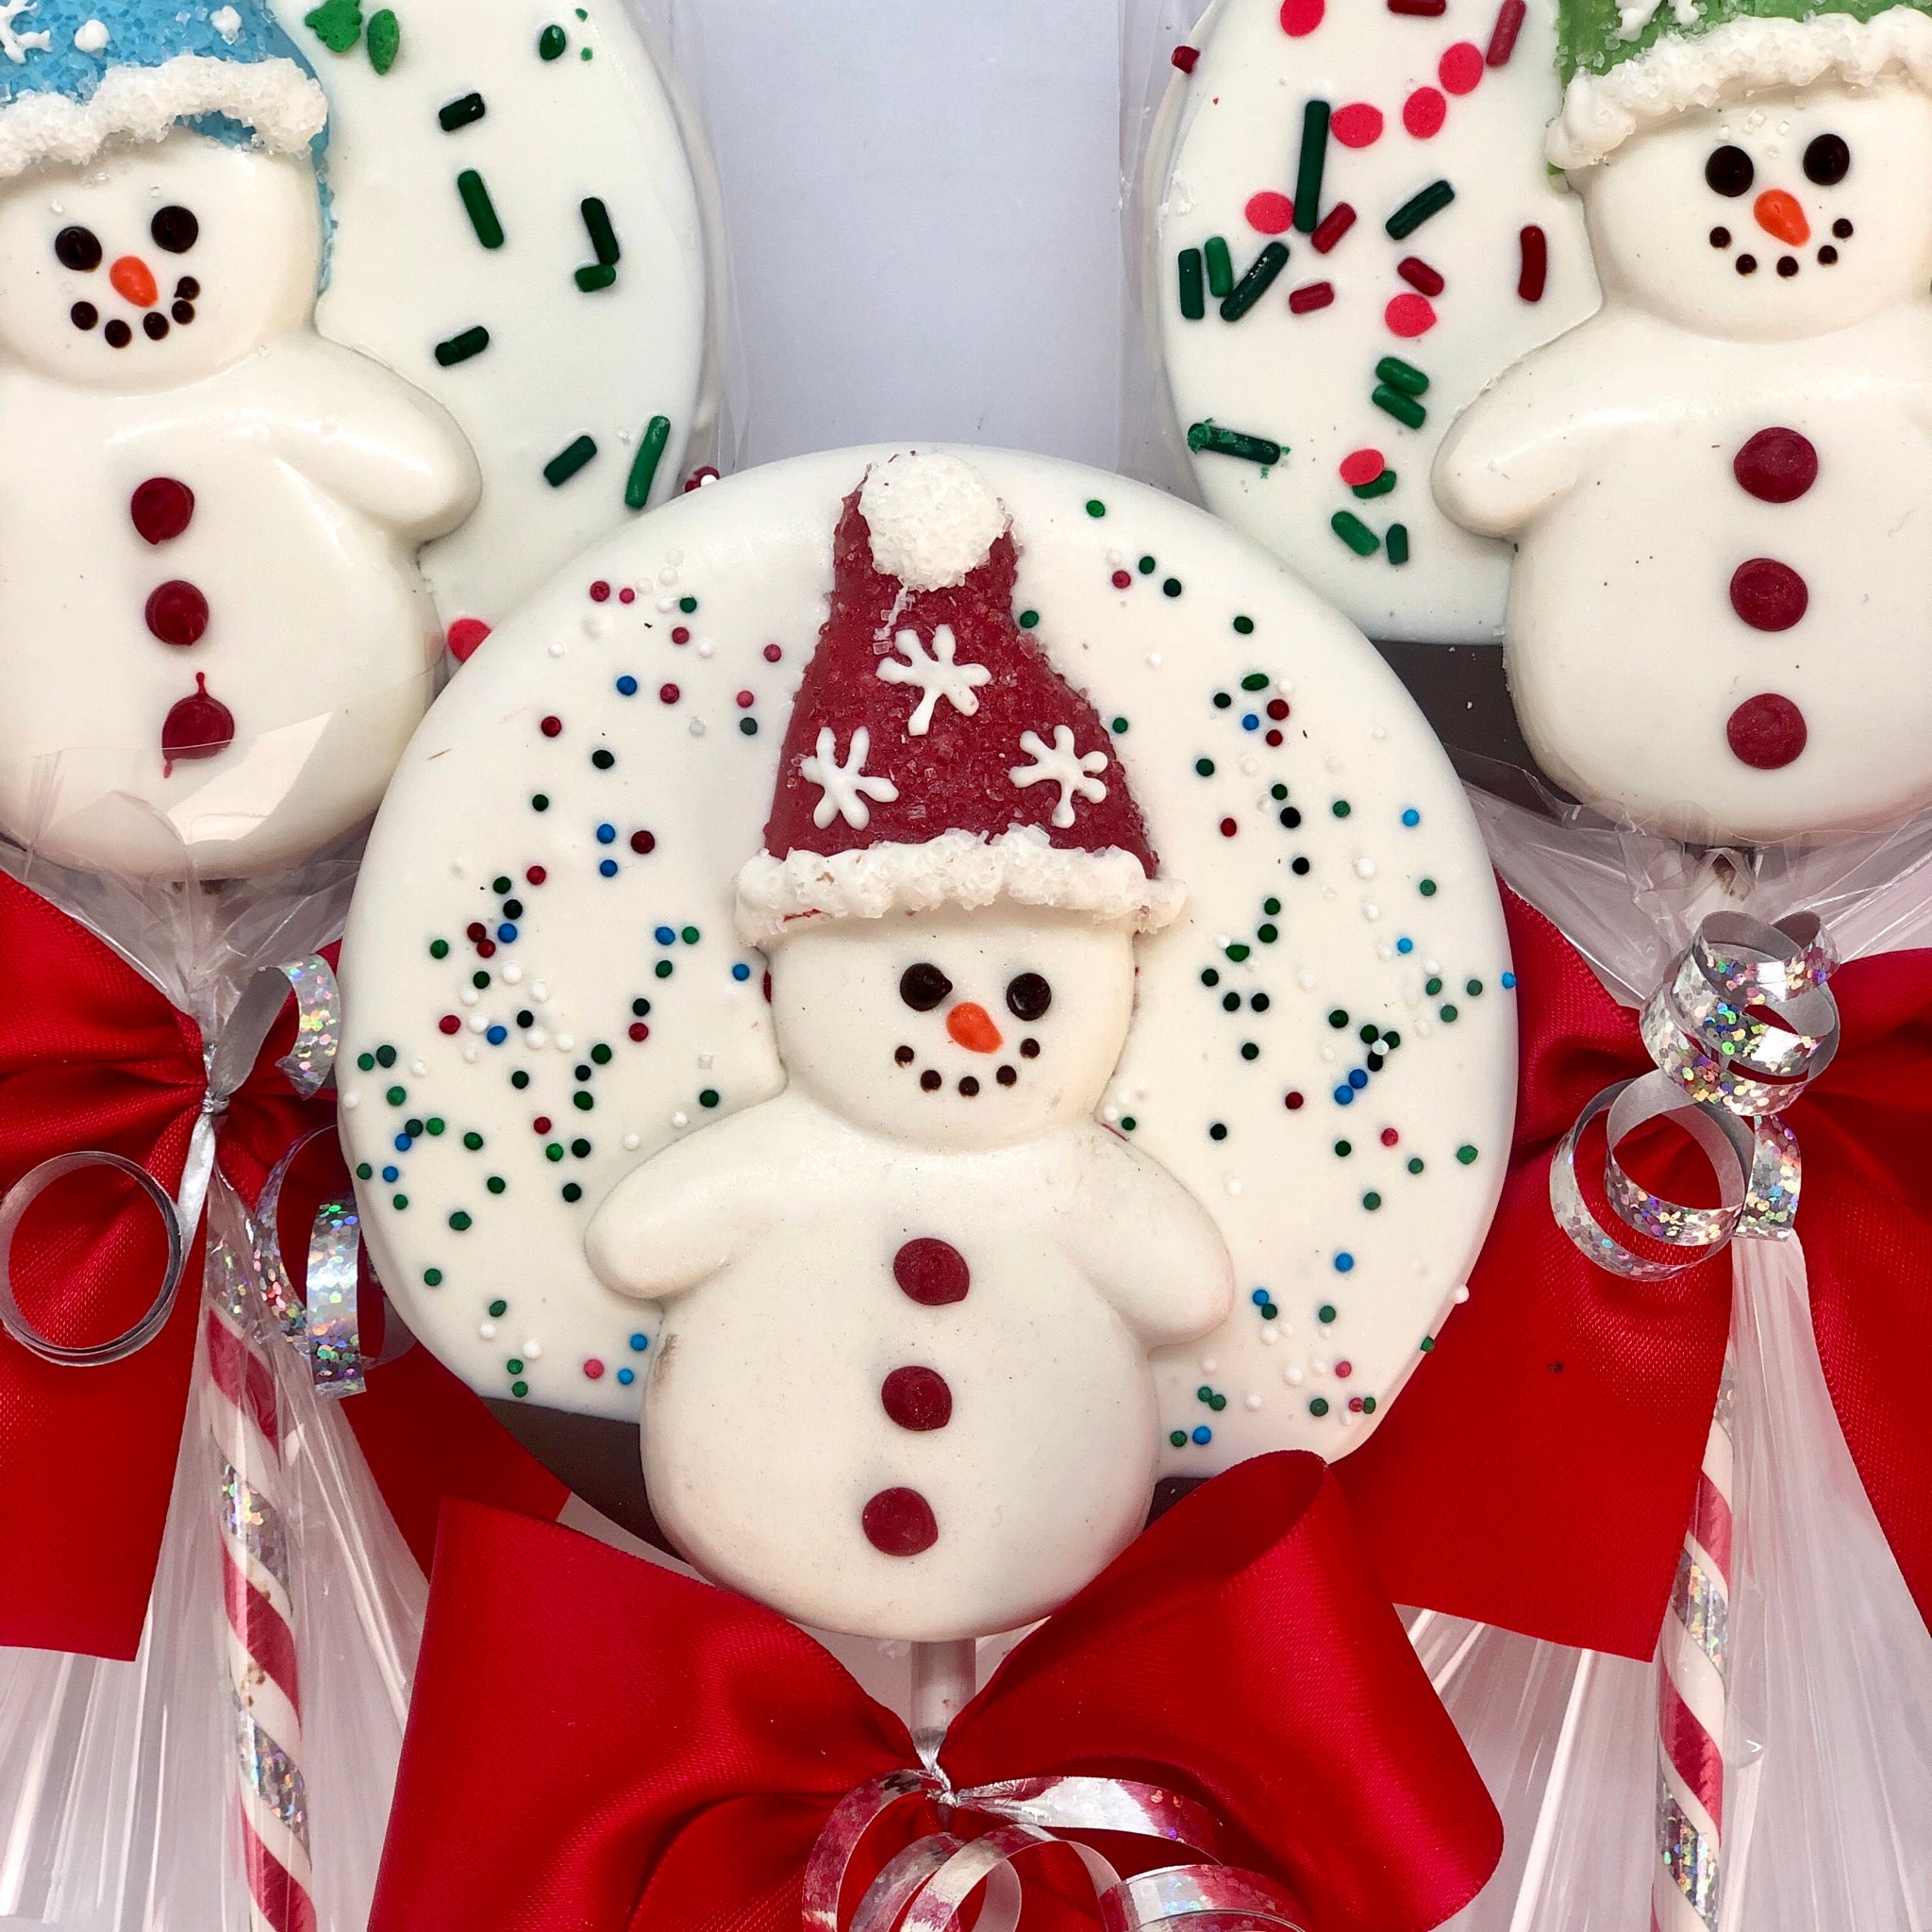 Snowman Chocolate Crispy Lollies wrapped in cellophane with a ribbon